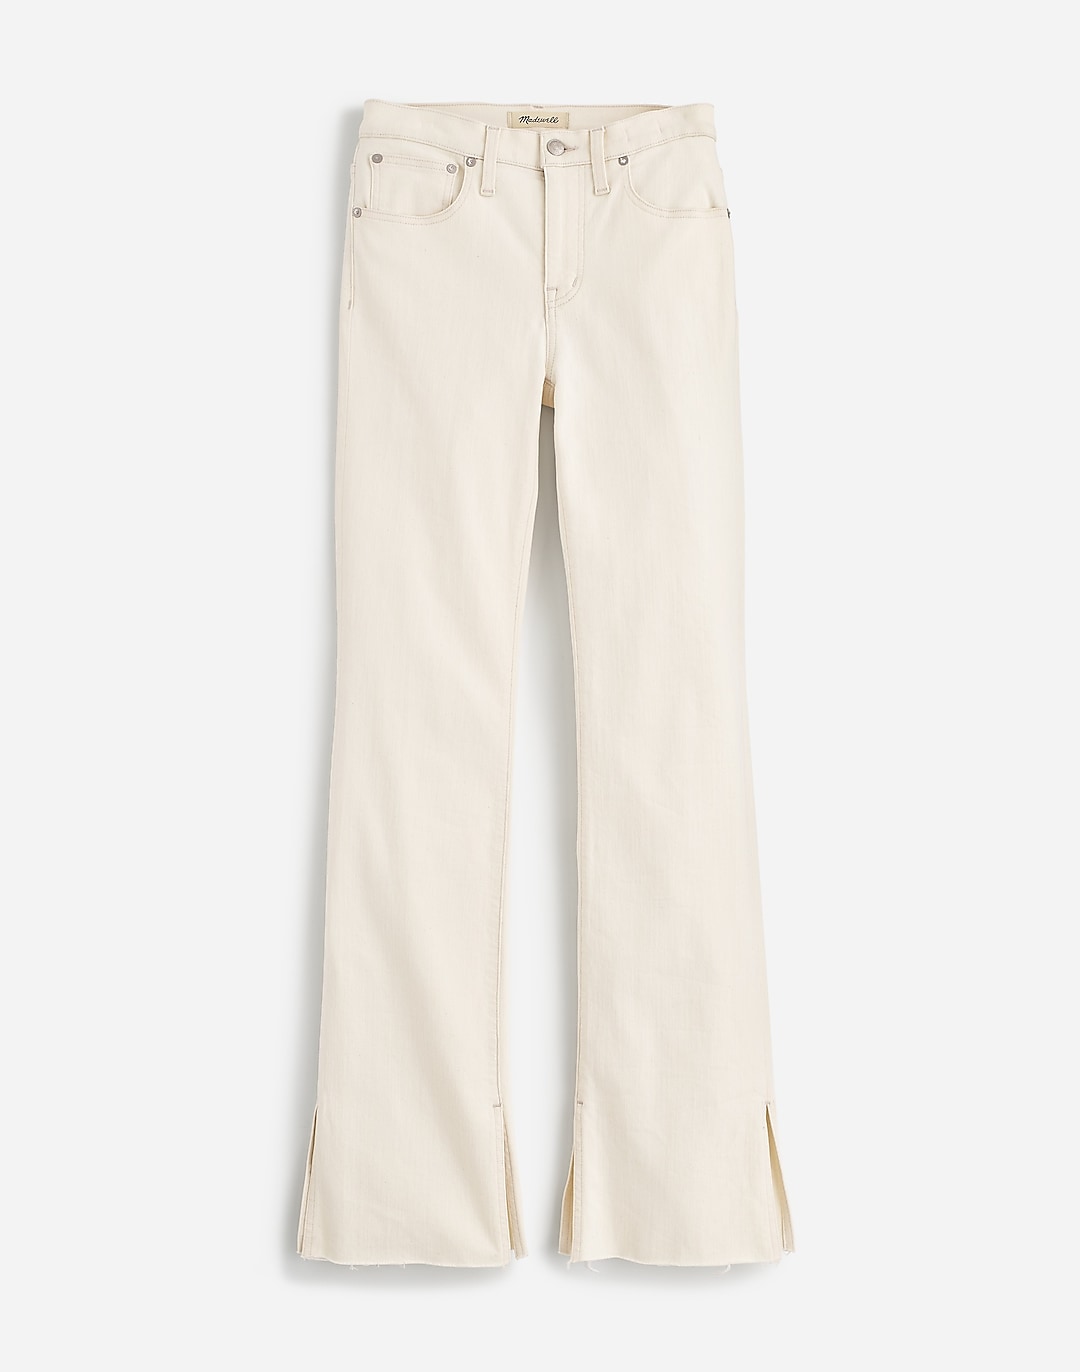 Kick Out Full-Length Jeans in Vintage Canvas: Raw-Hem Edition | Madewell